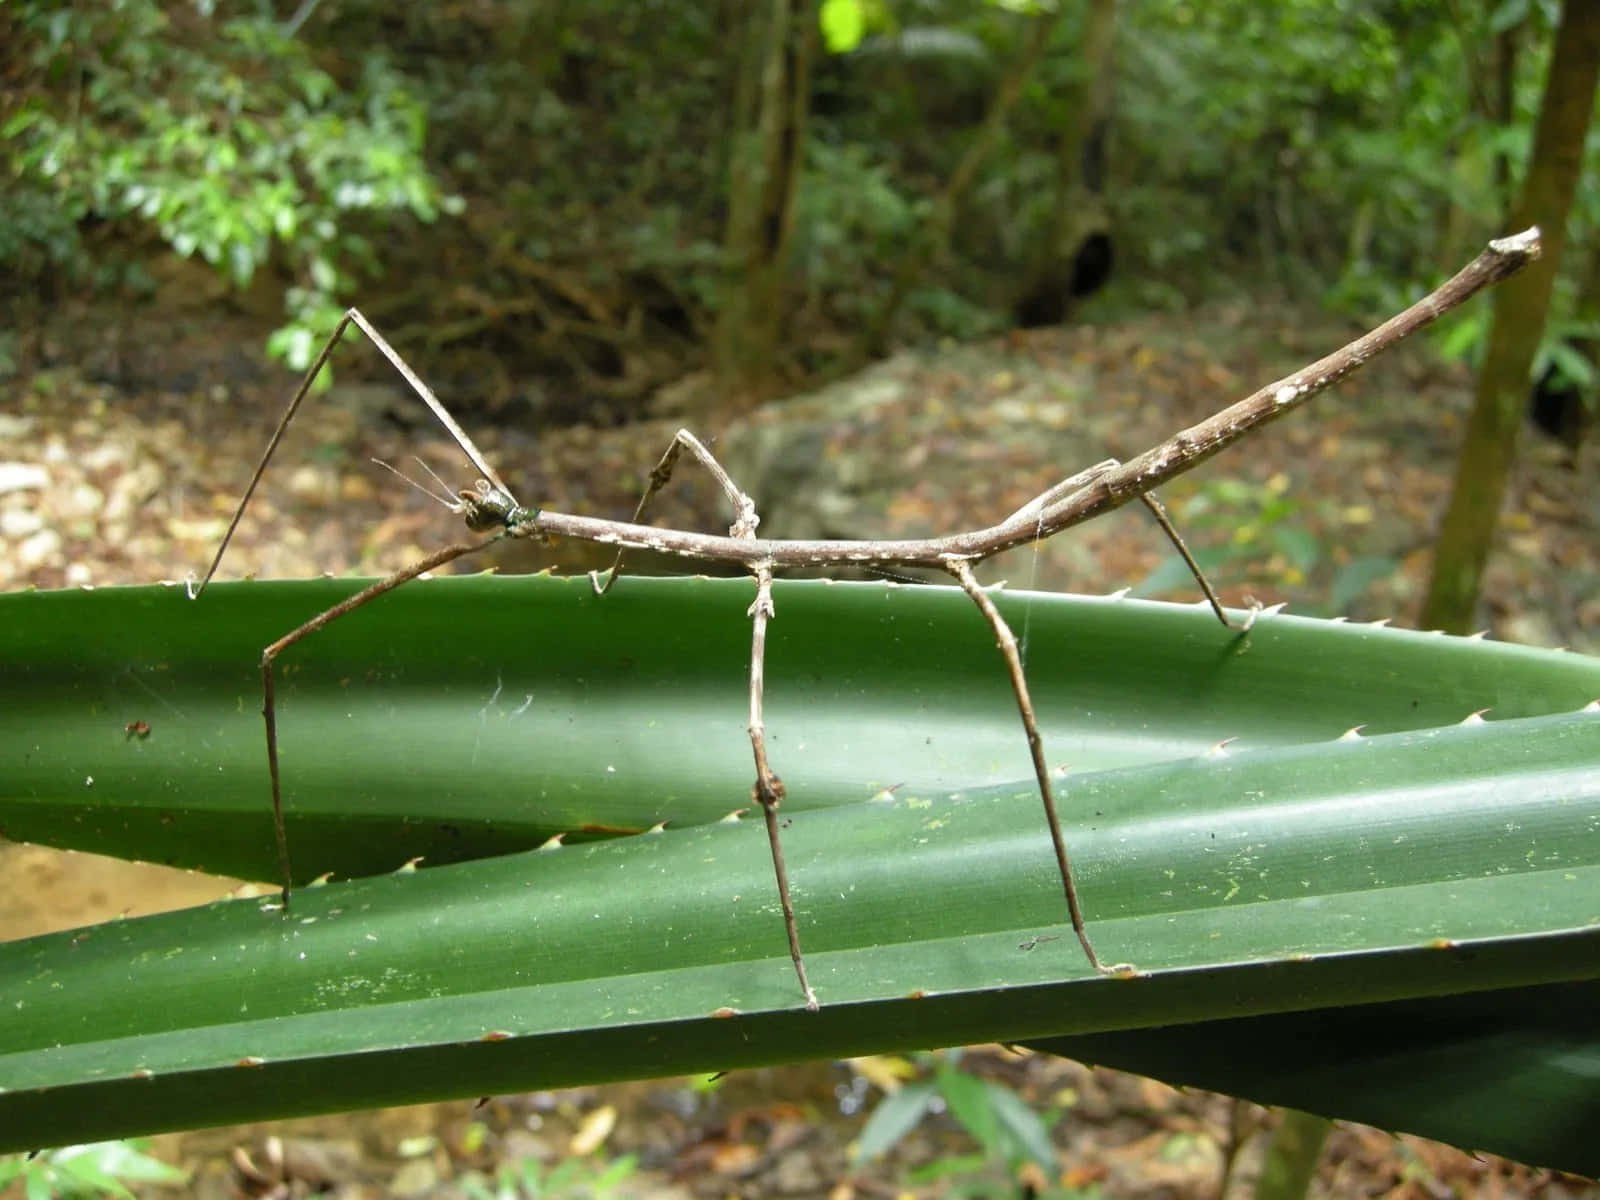 Walkingstick Insect Camouflage.jpg Wallpaper